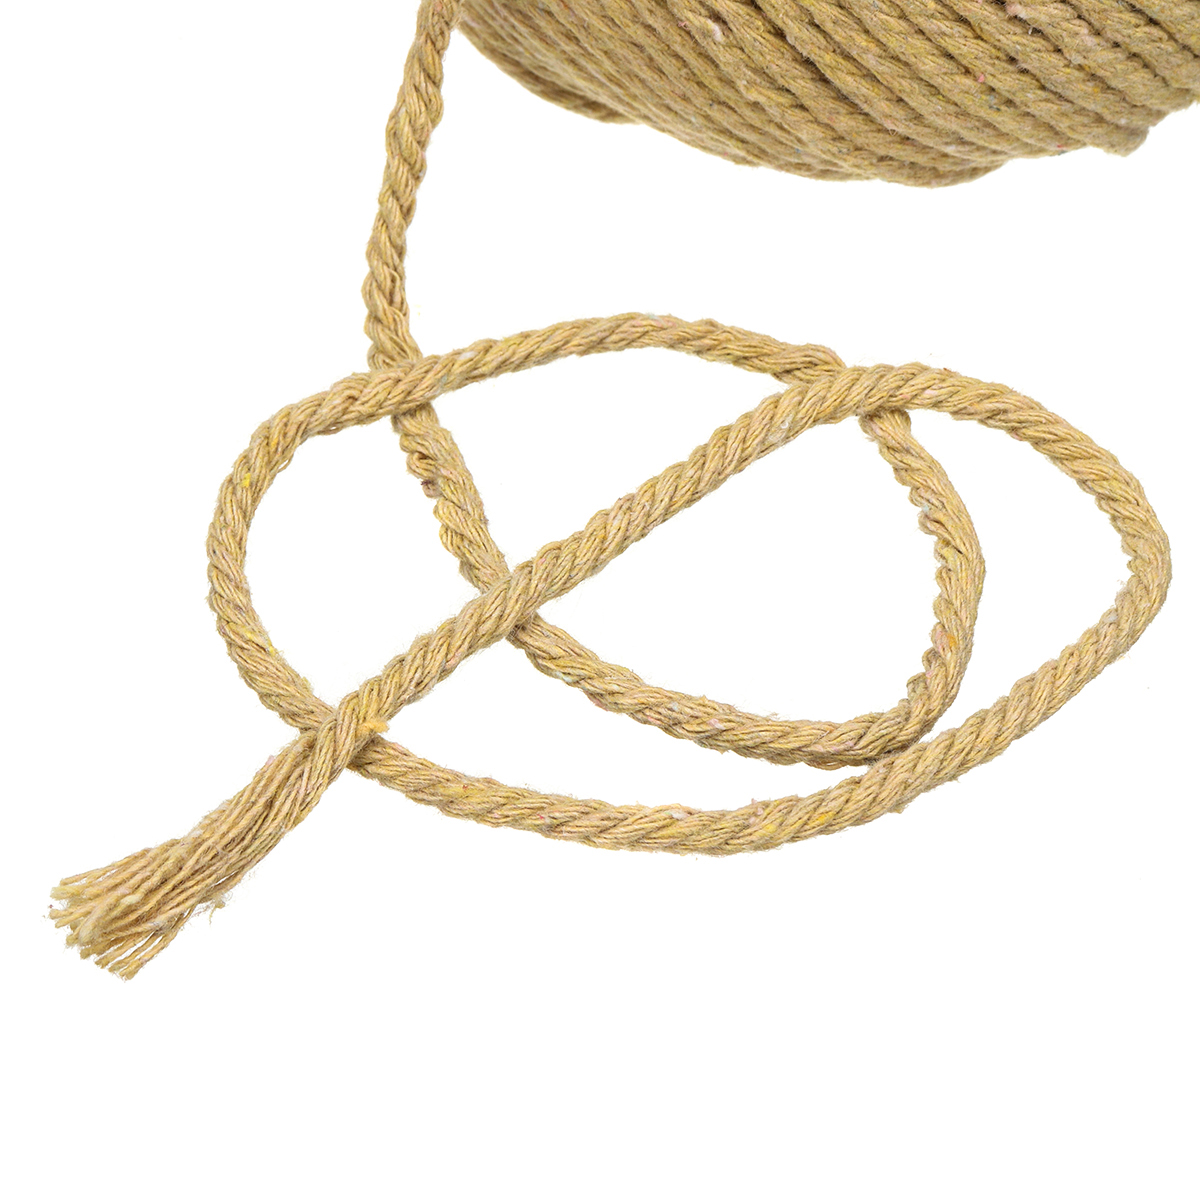 4-Colors-4mm-110m-Natural-Cotton-Twisted-Cord-Rope-Macrame-Linen-Jute-DIY-Braided-Wire-Hand-Craft-1361935-10